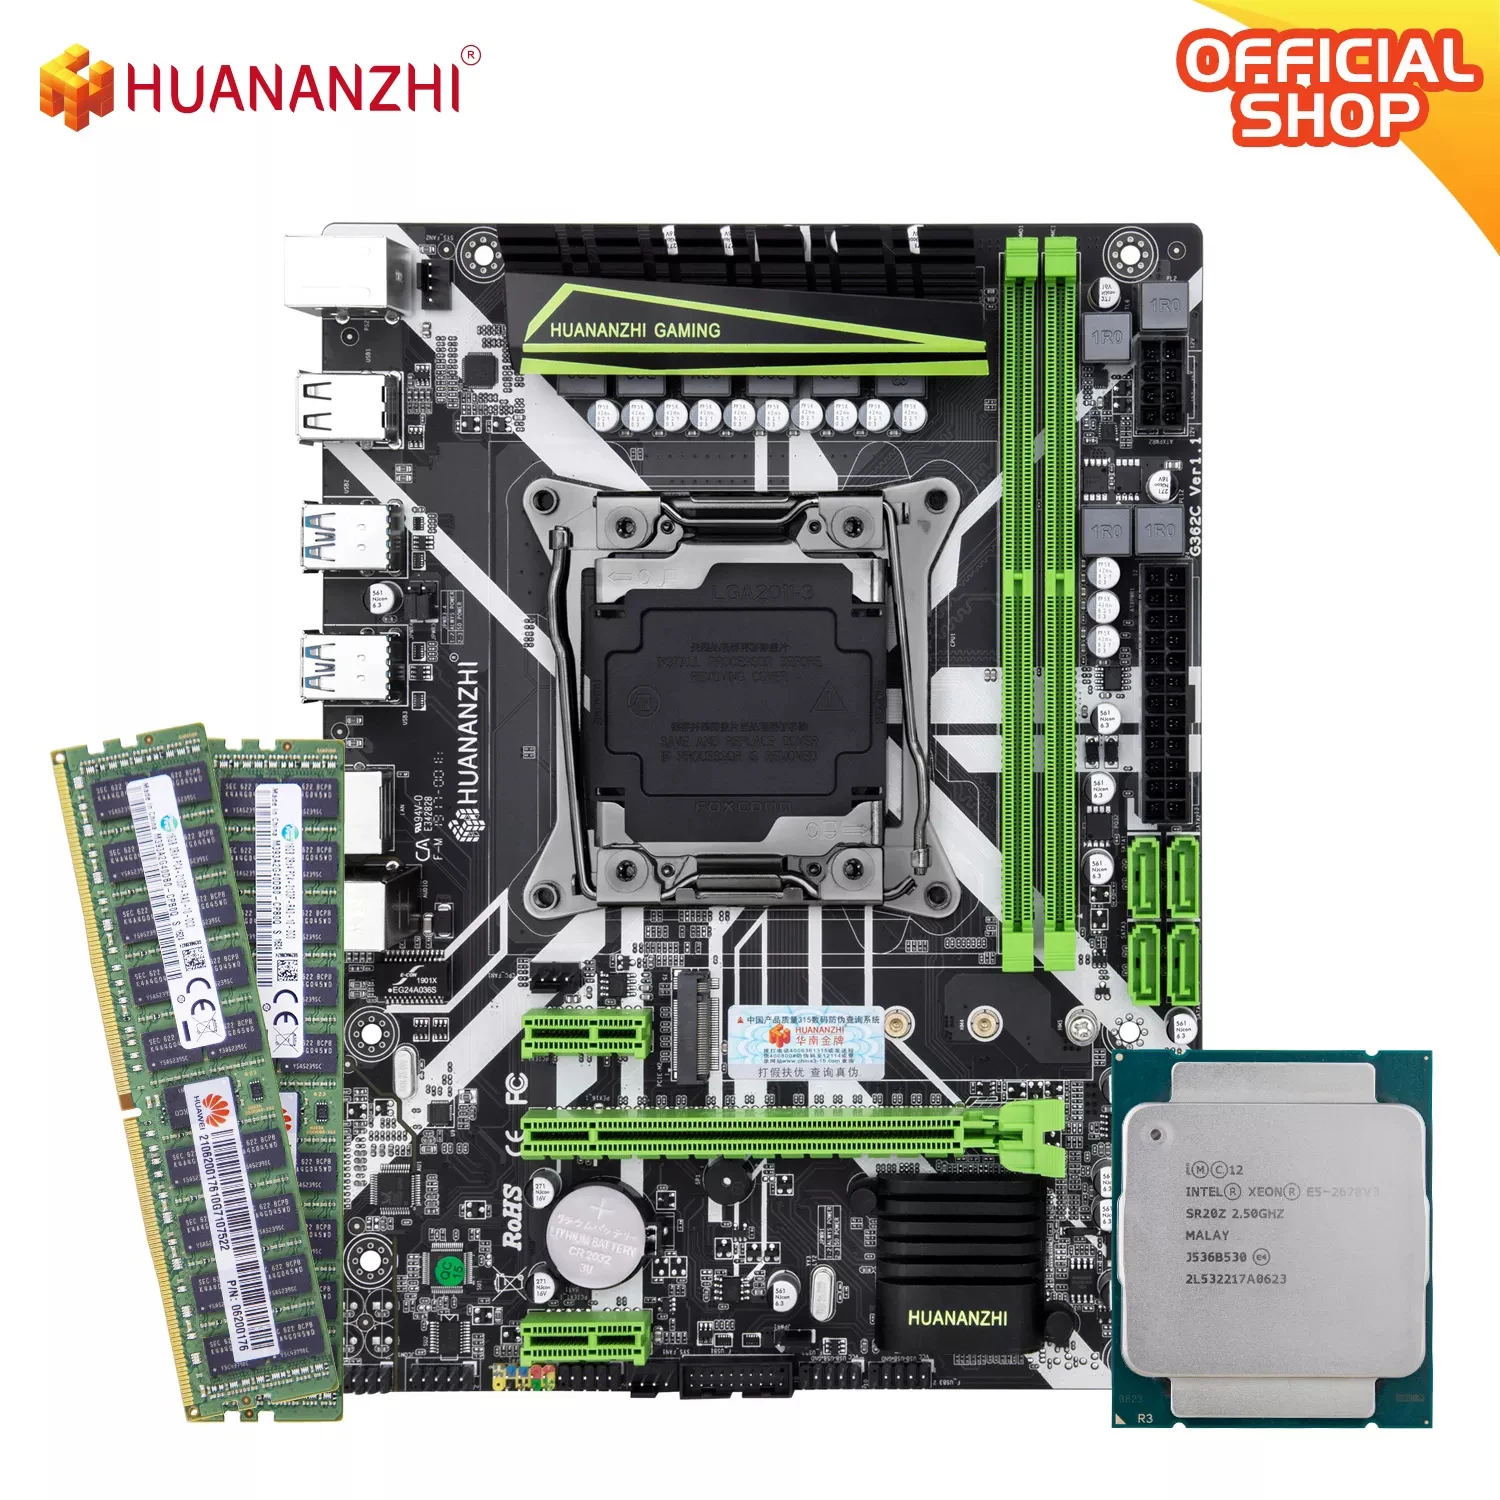 

HUANANZHI X99 8M D4 X99 Motherboard with Intel XEON E5 2678 V3 with 2*16G DDR4 RECC memory combo kit set NVME USB3.0 ATX Server